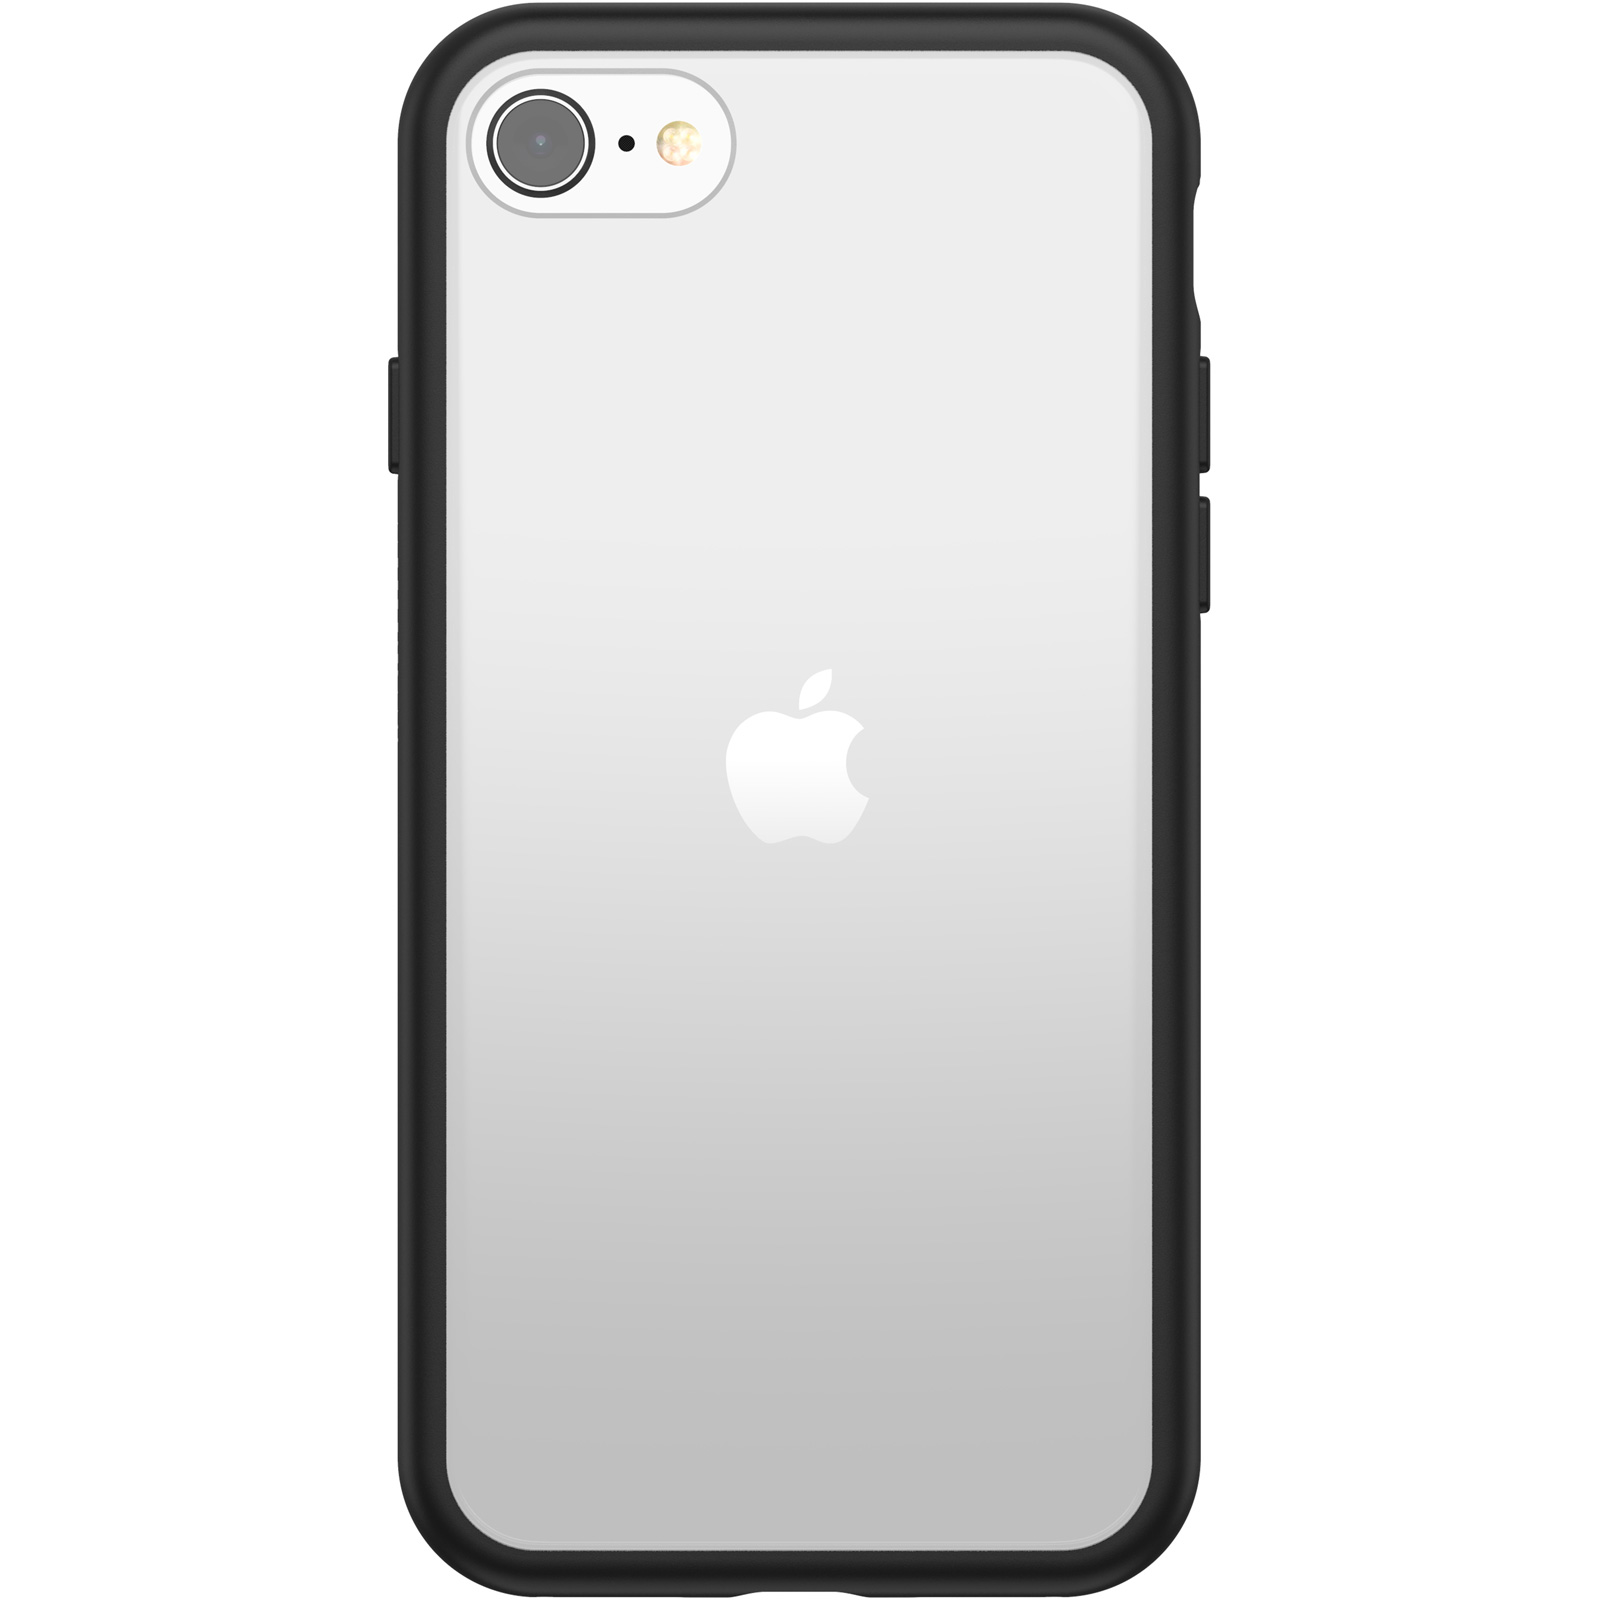 OtterBox 77-56783 Universe Case for iPhone 7 8, Black